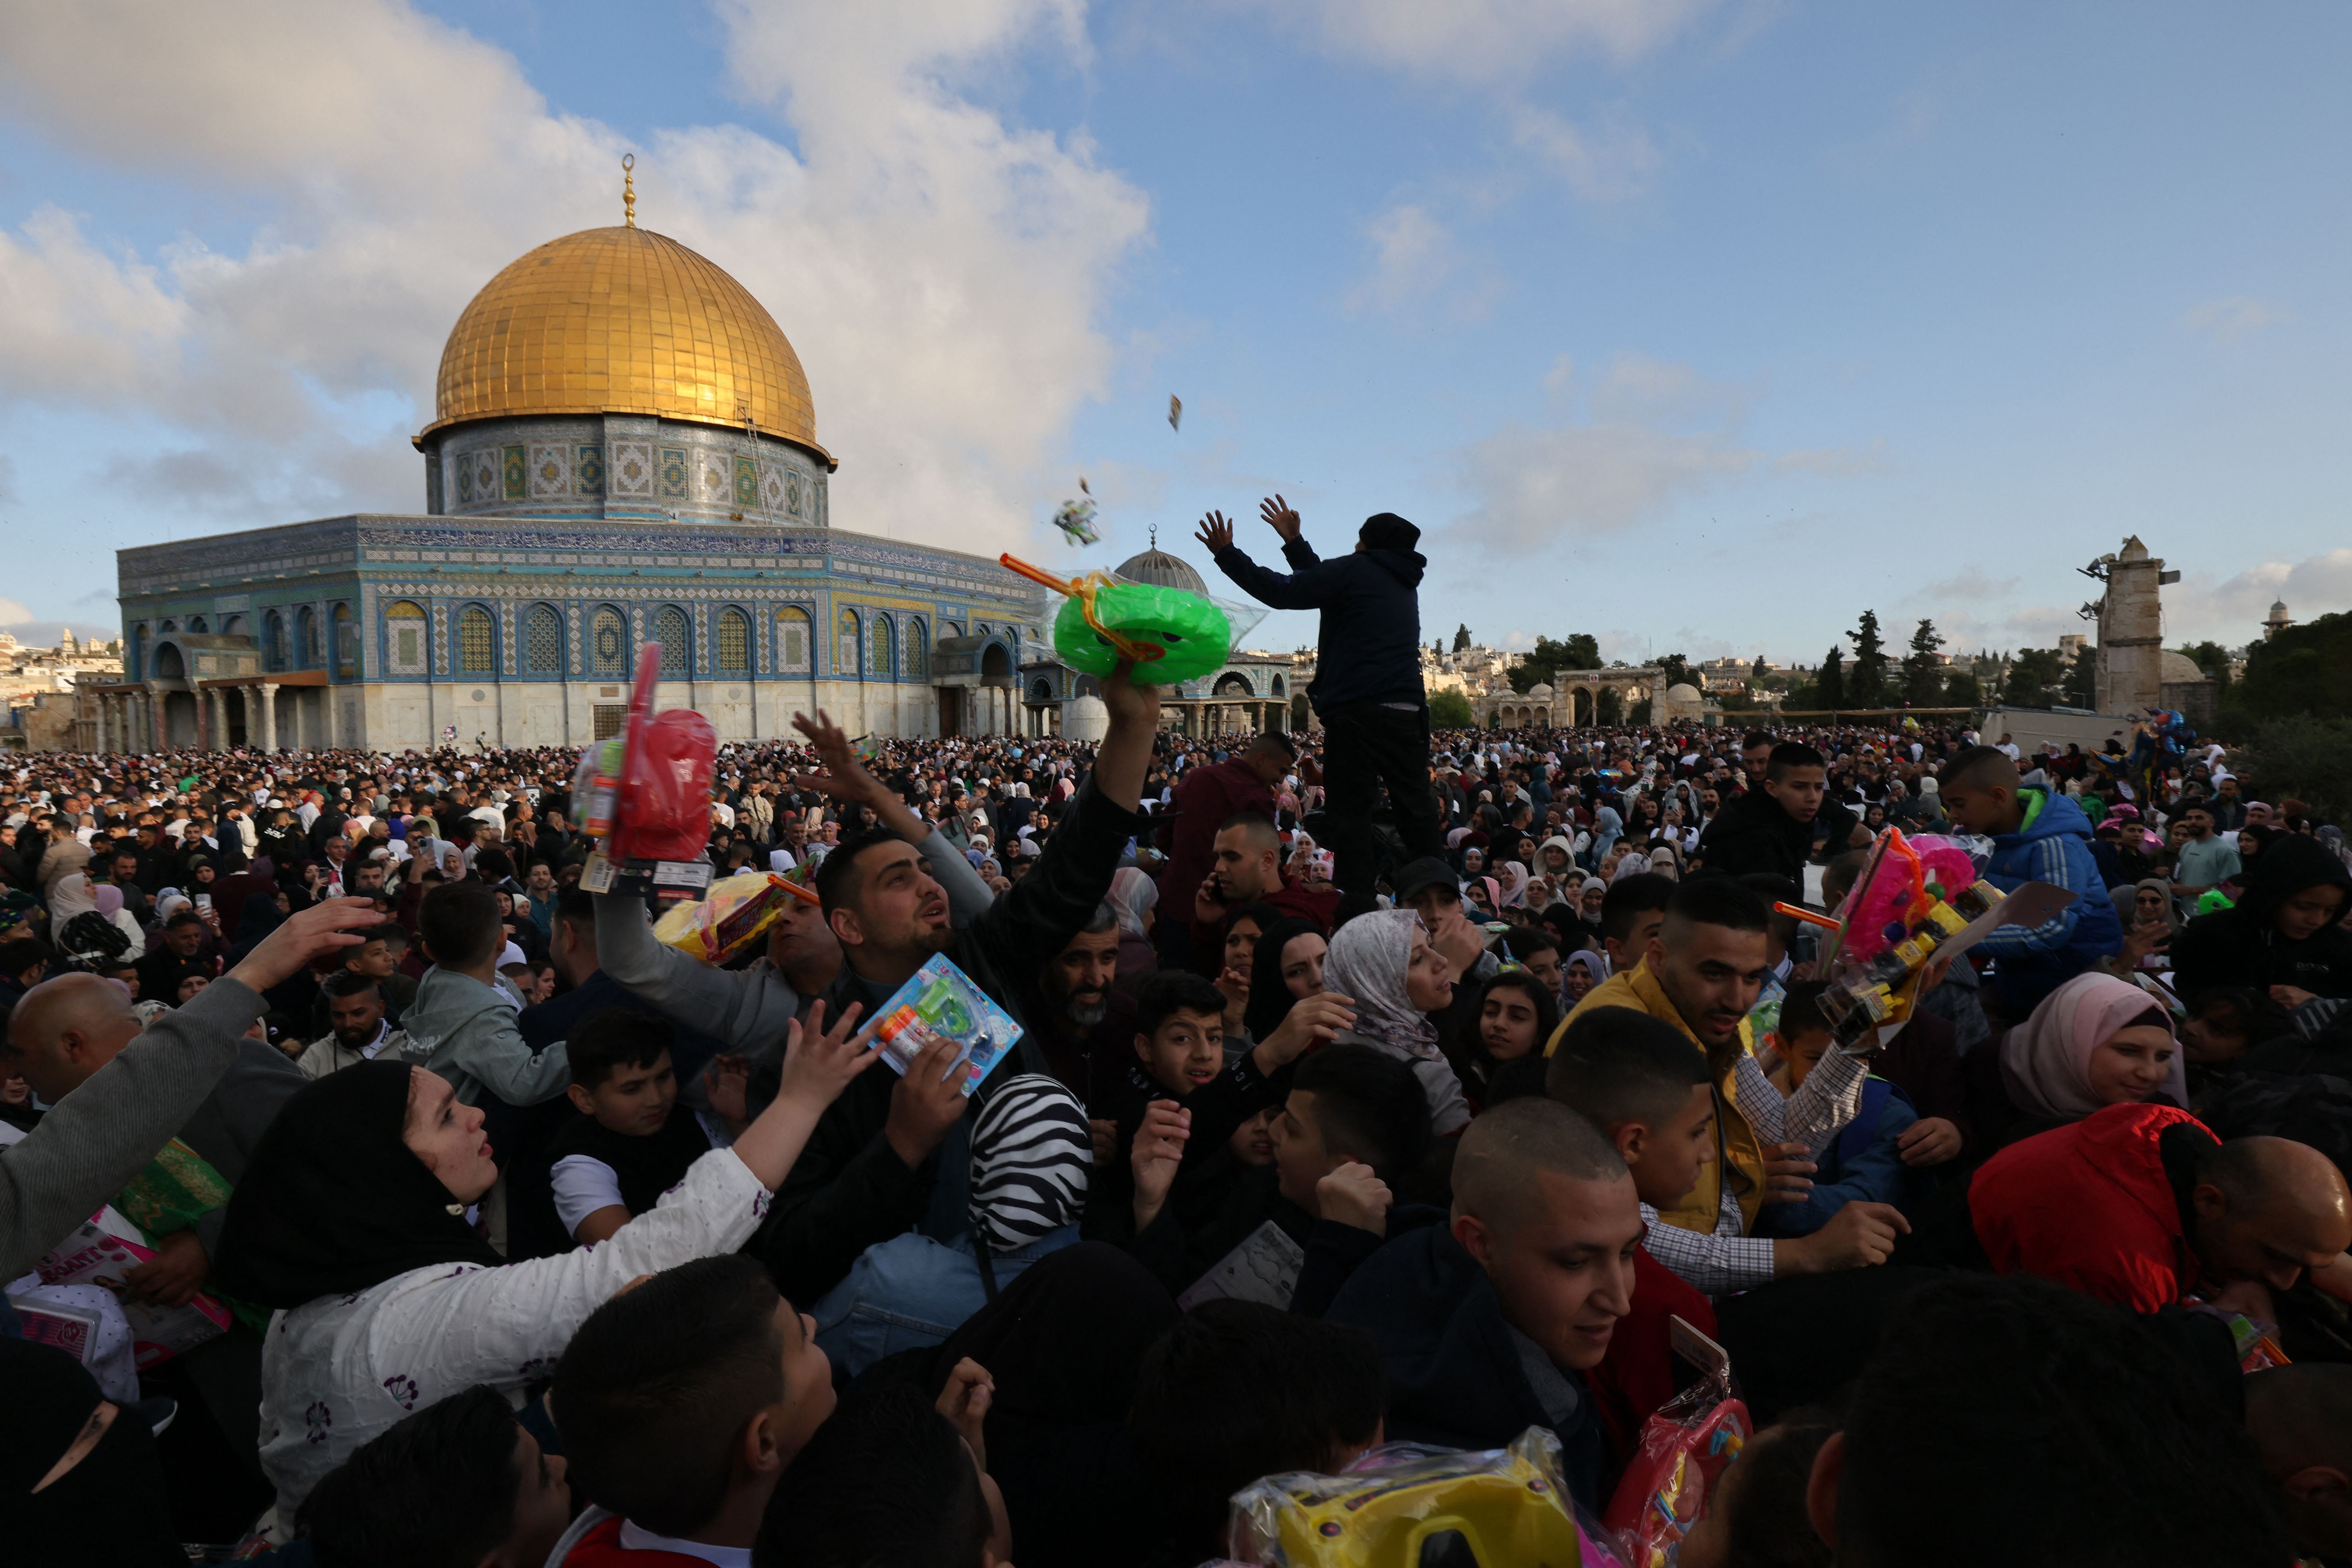 Muslims exchange gifts as they gather on the first day of Eid al-Fitr to celebrate the end of the holy fasting month of Ramadan outside the Dome of the Rock at the Aqsa mosques complex in the Old city of Jerusalem